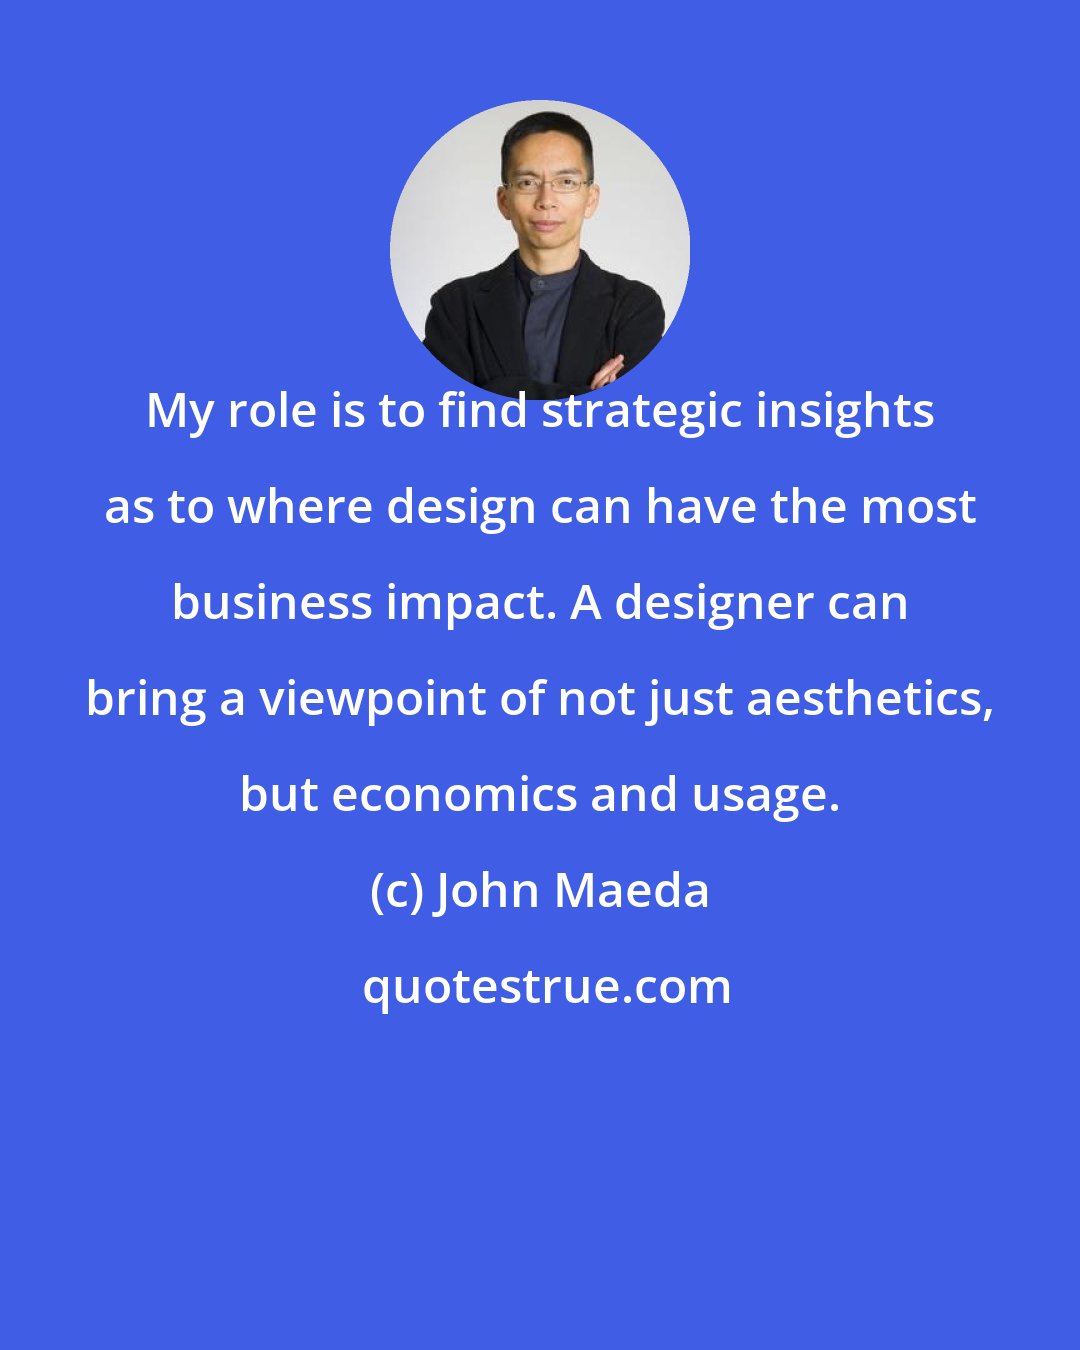 John Maeda: My role is to find strategic insights as to where design can have the most business impact. A designer can bring a viewpoint of not just aesthetics, but economics and usage.